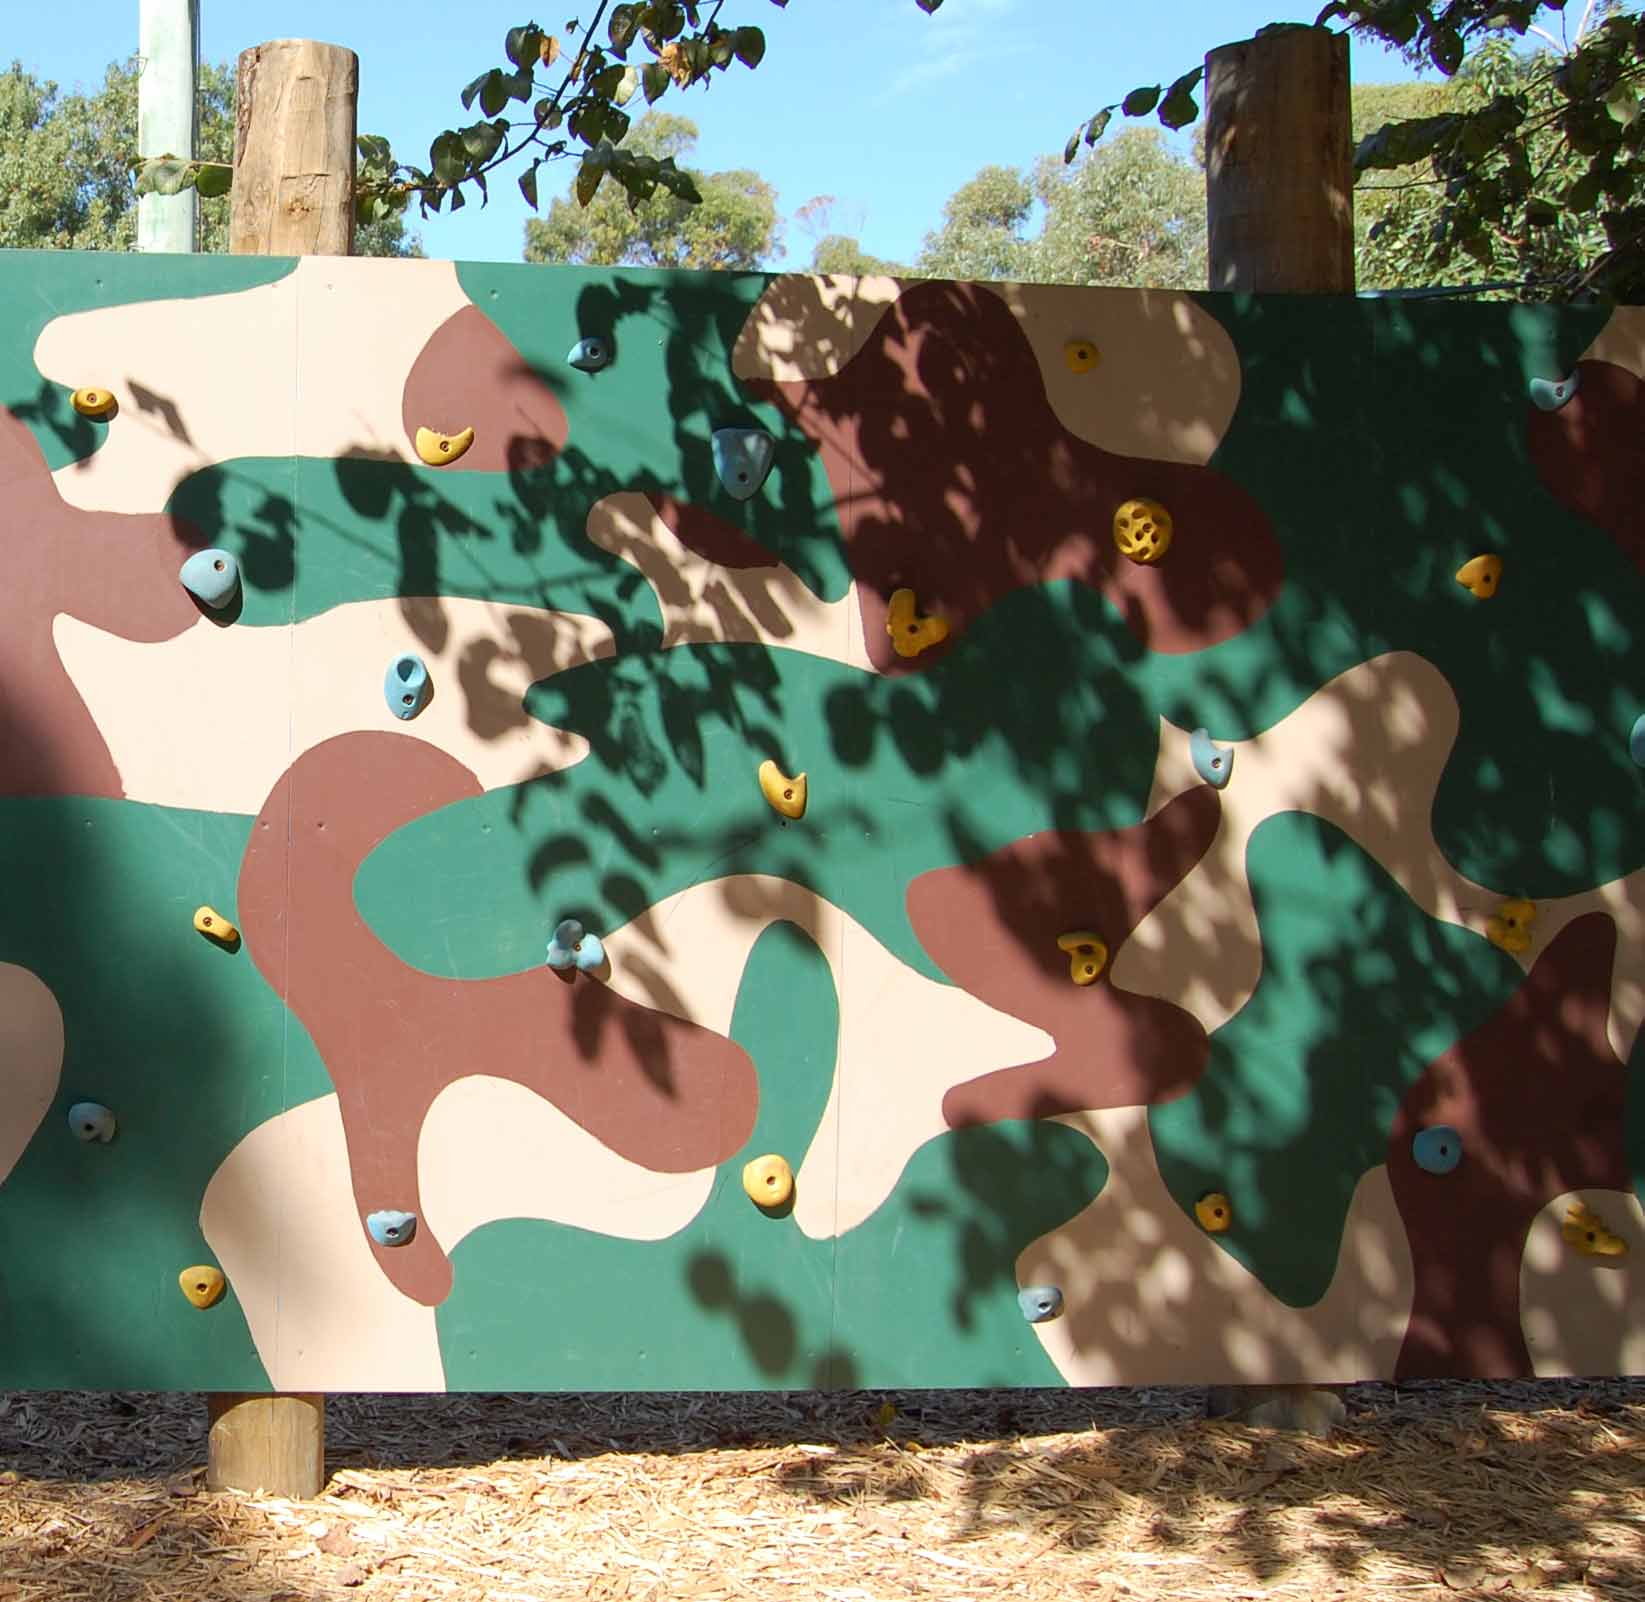 The traversing wall is painted in camouflage colours